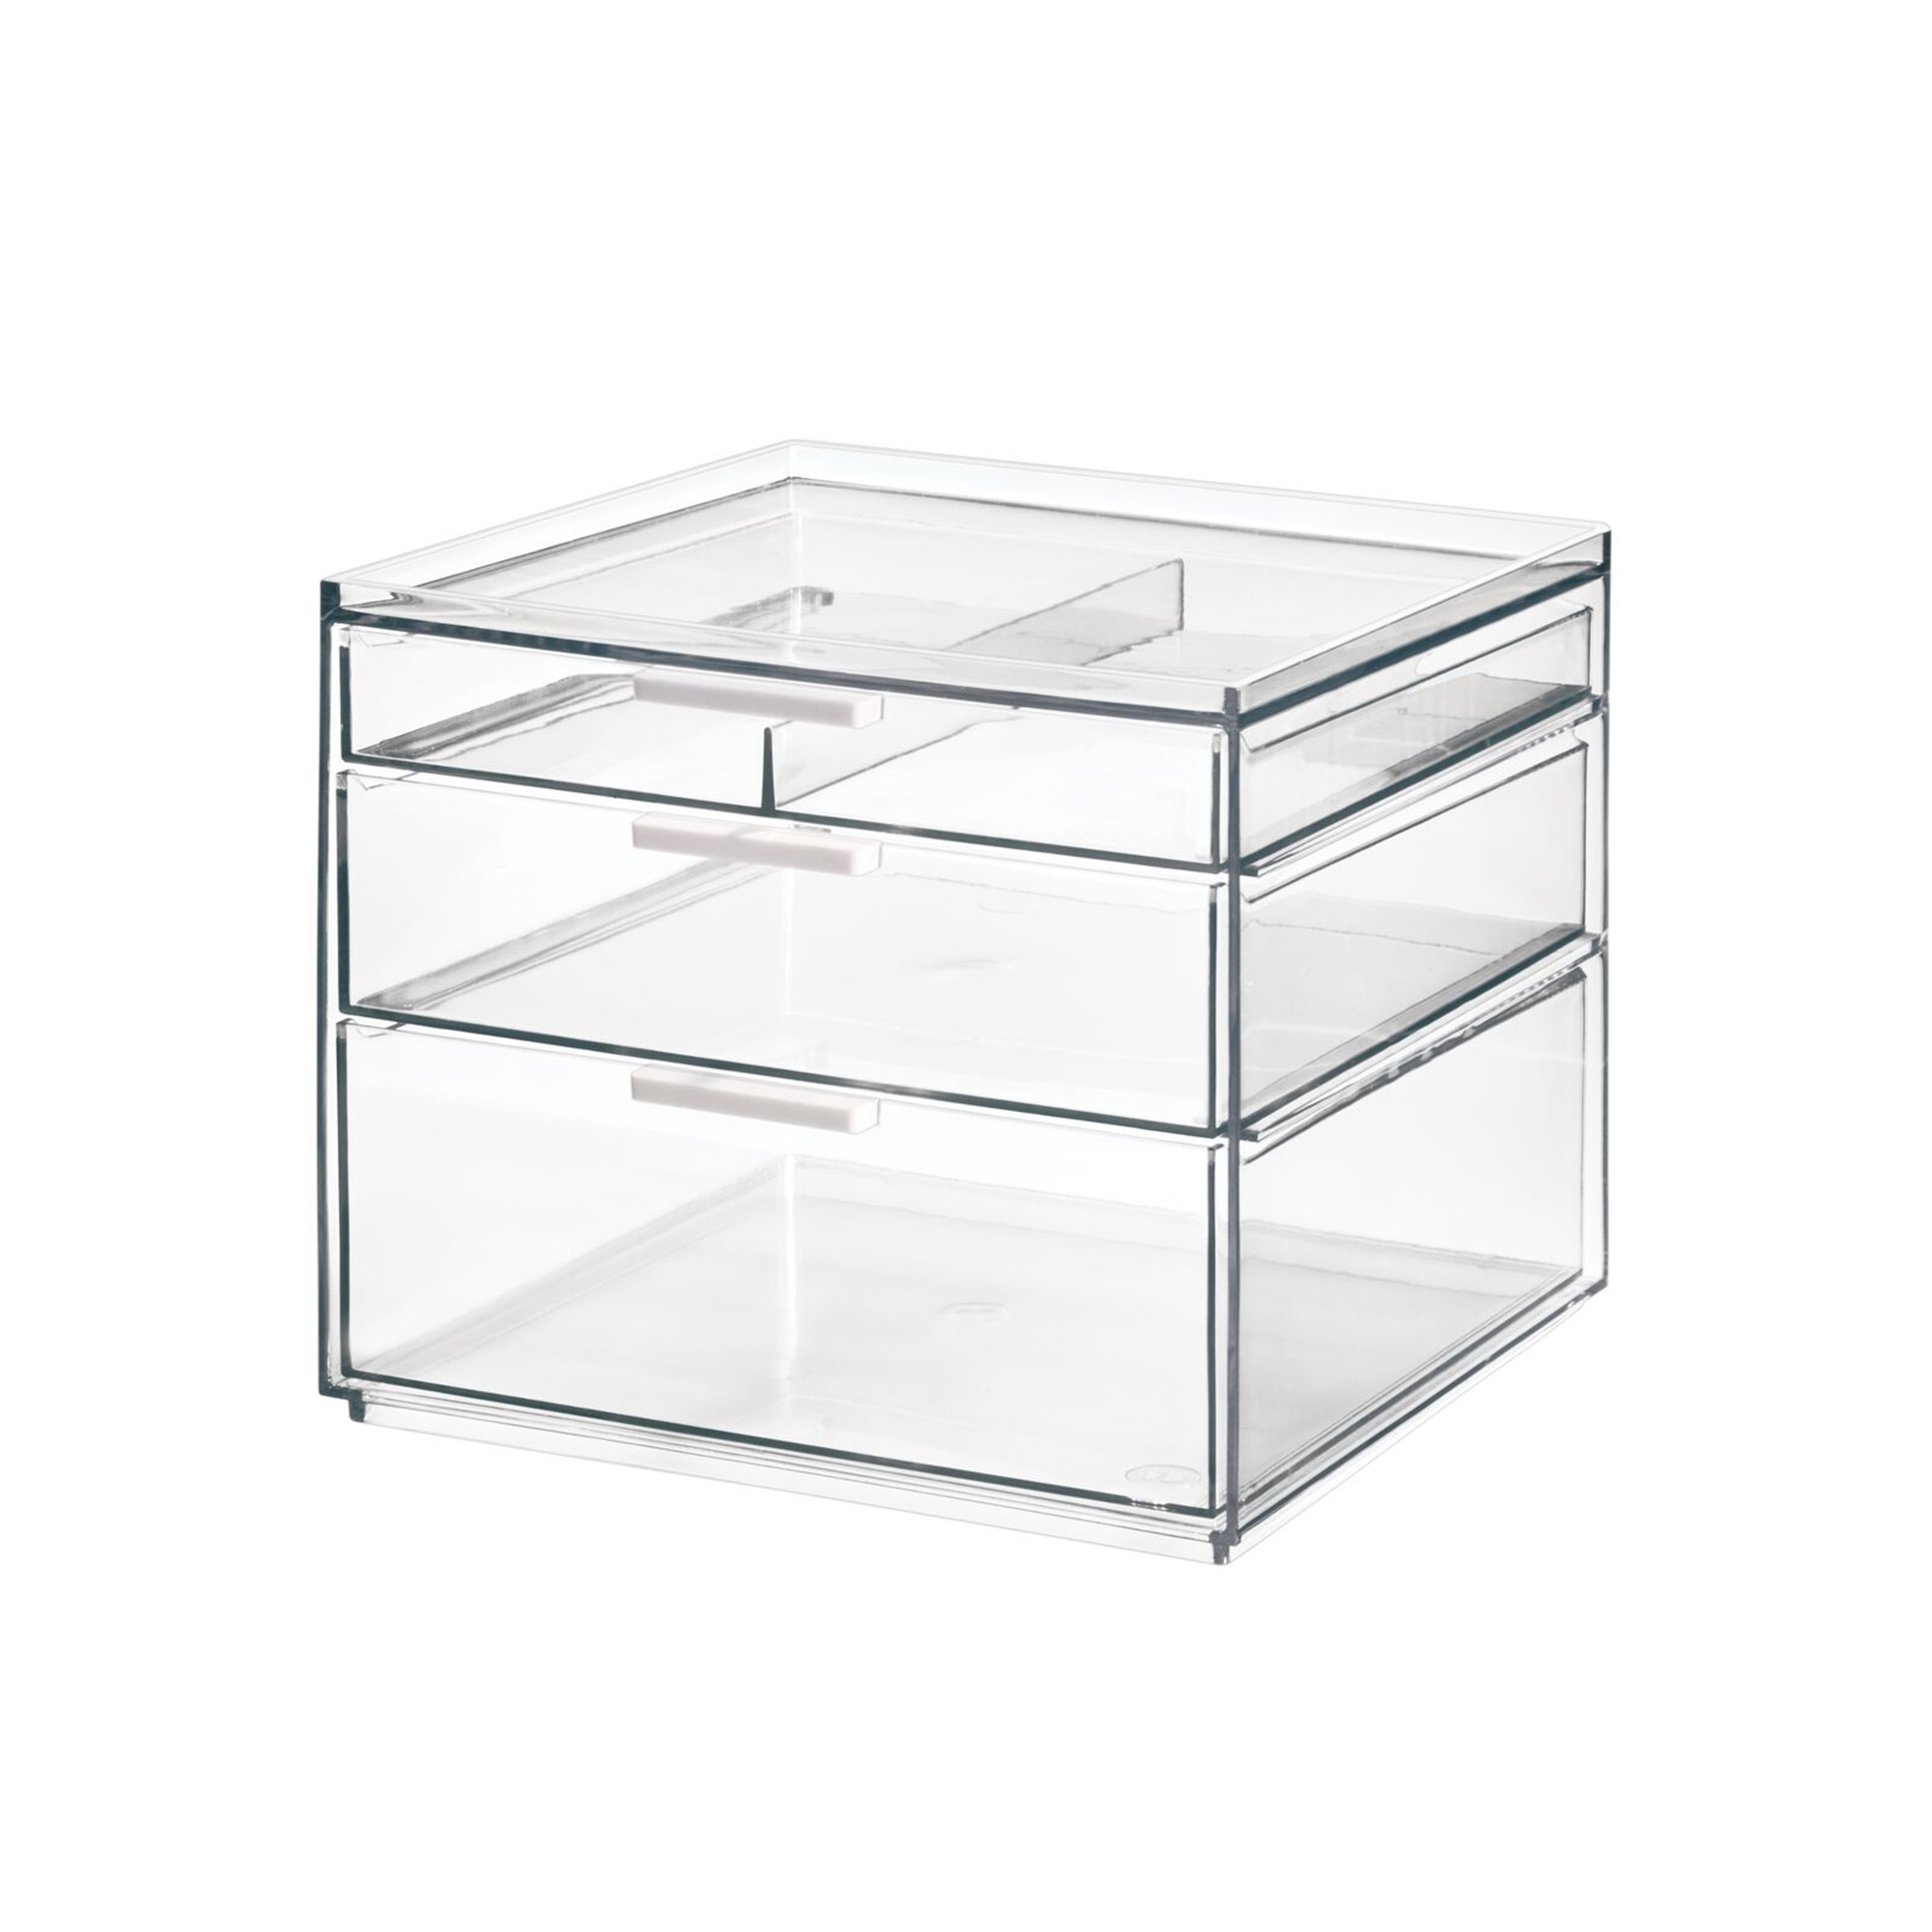 Sarah Tanno by iDesign 3 Drawer Cosmetic Organiser Clear Image 1